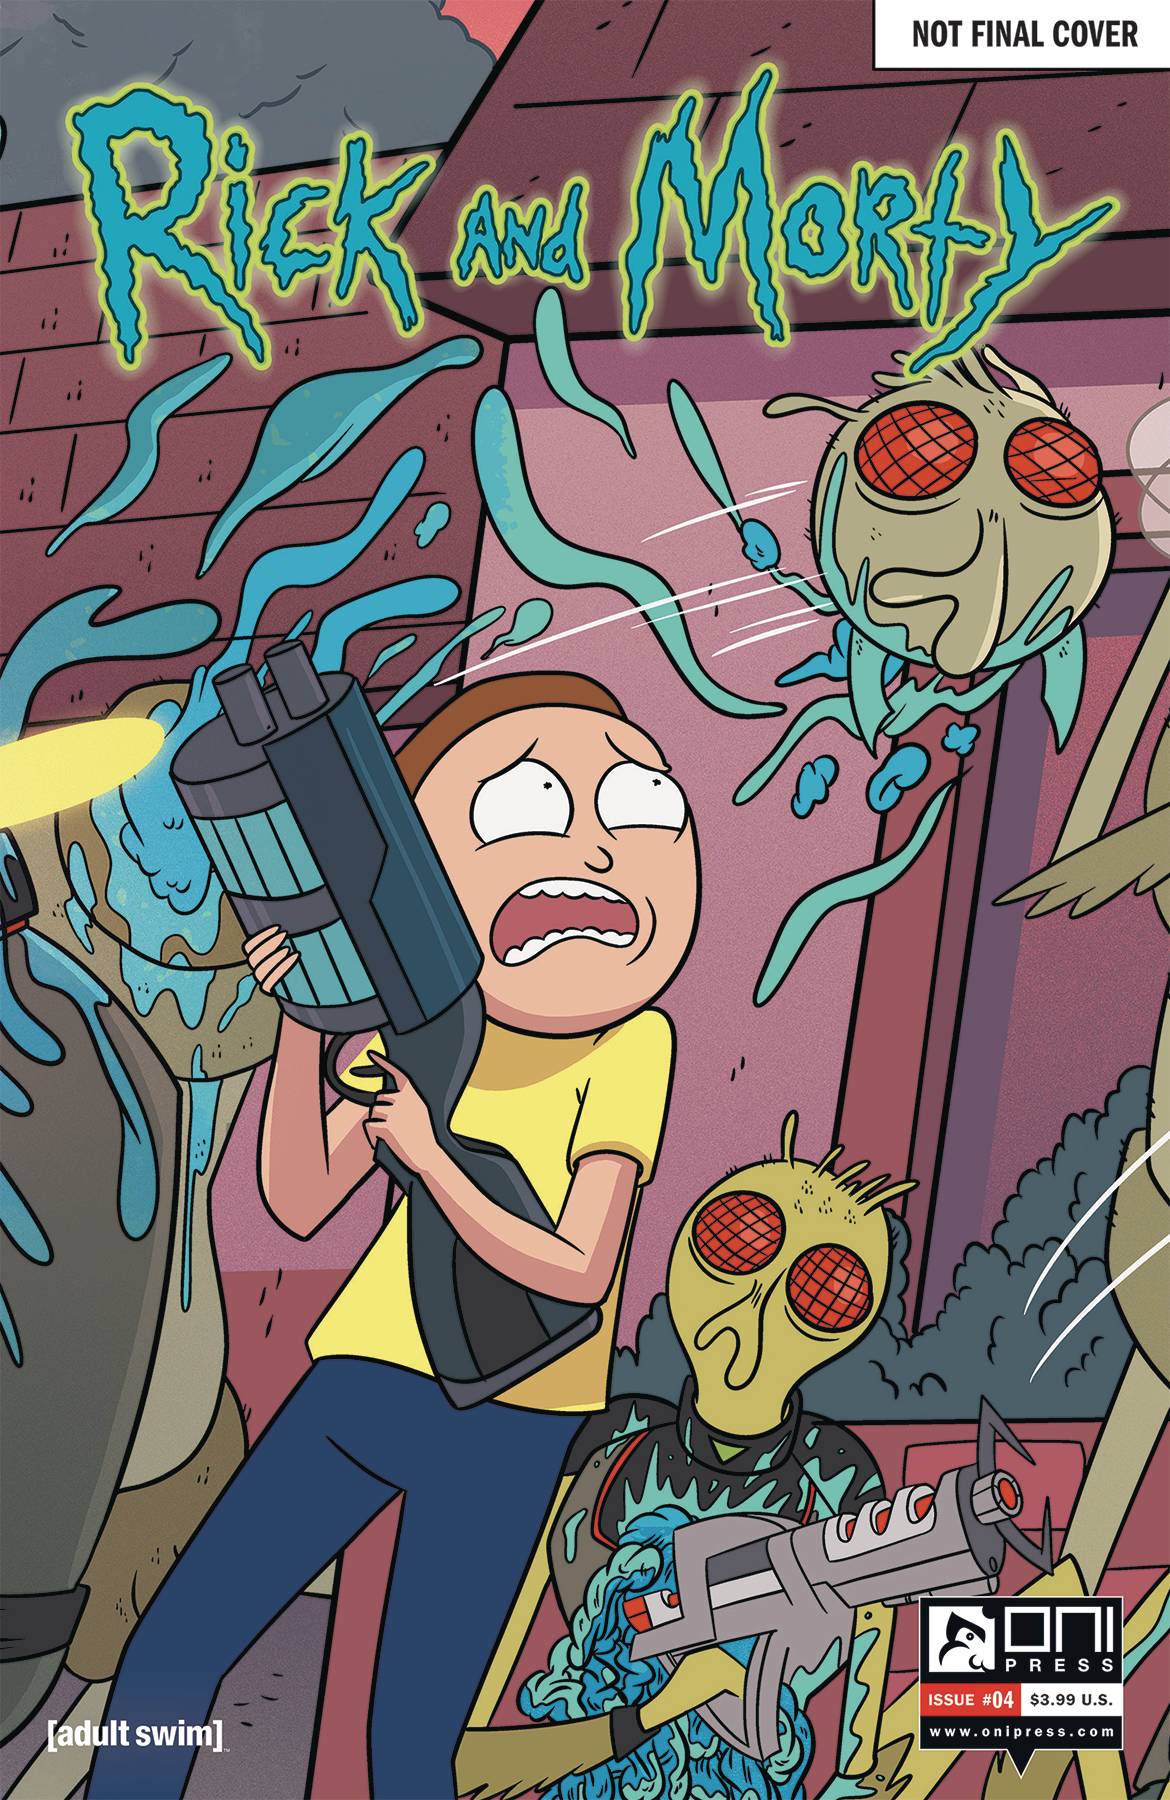 Rick and Morty #4 50 Issues Special Variant (2015)